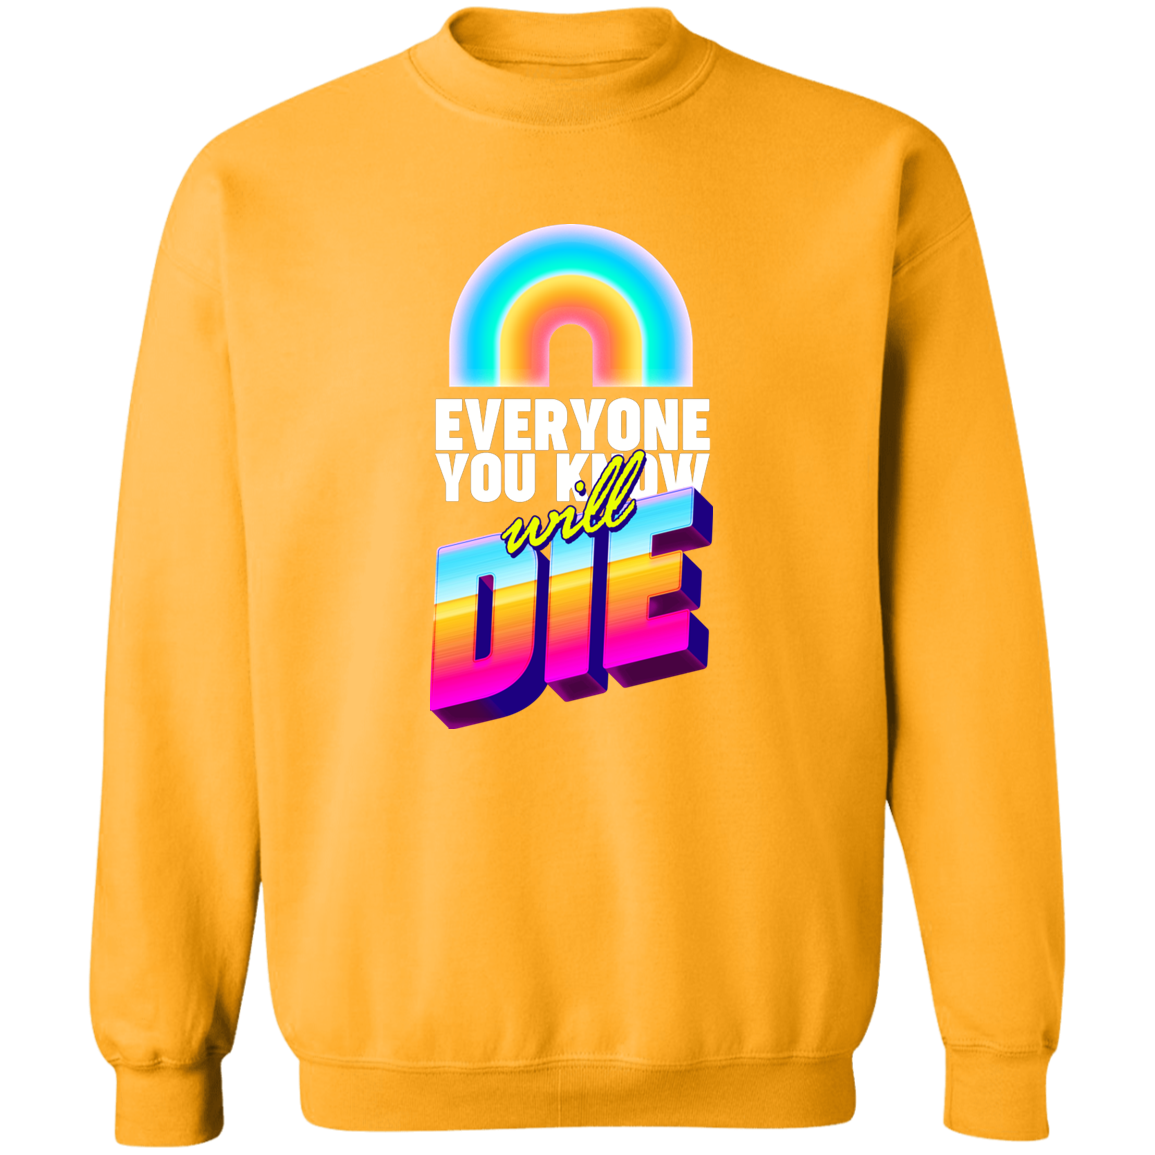 Everyone you know will Die Jumper